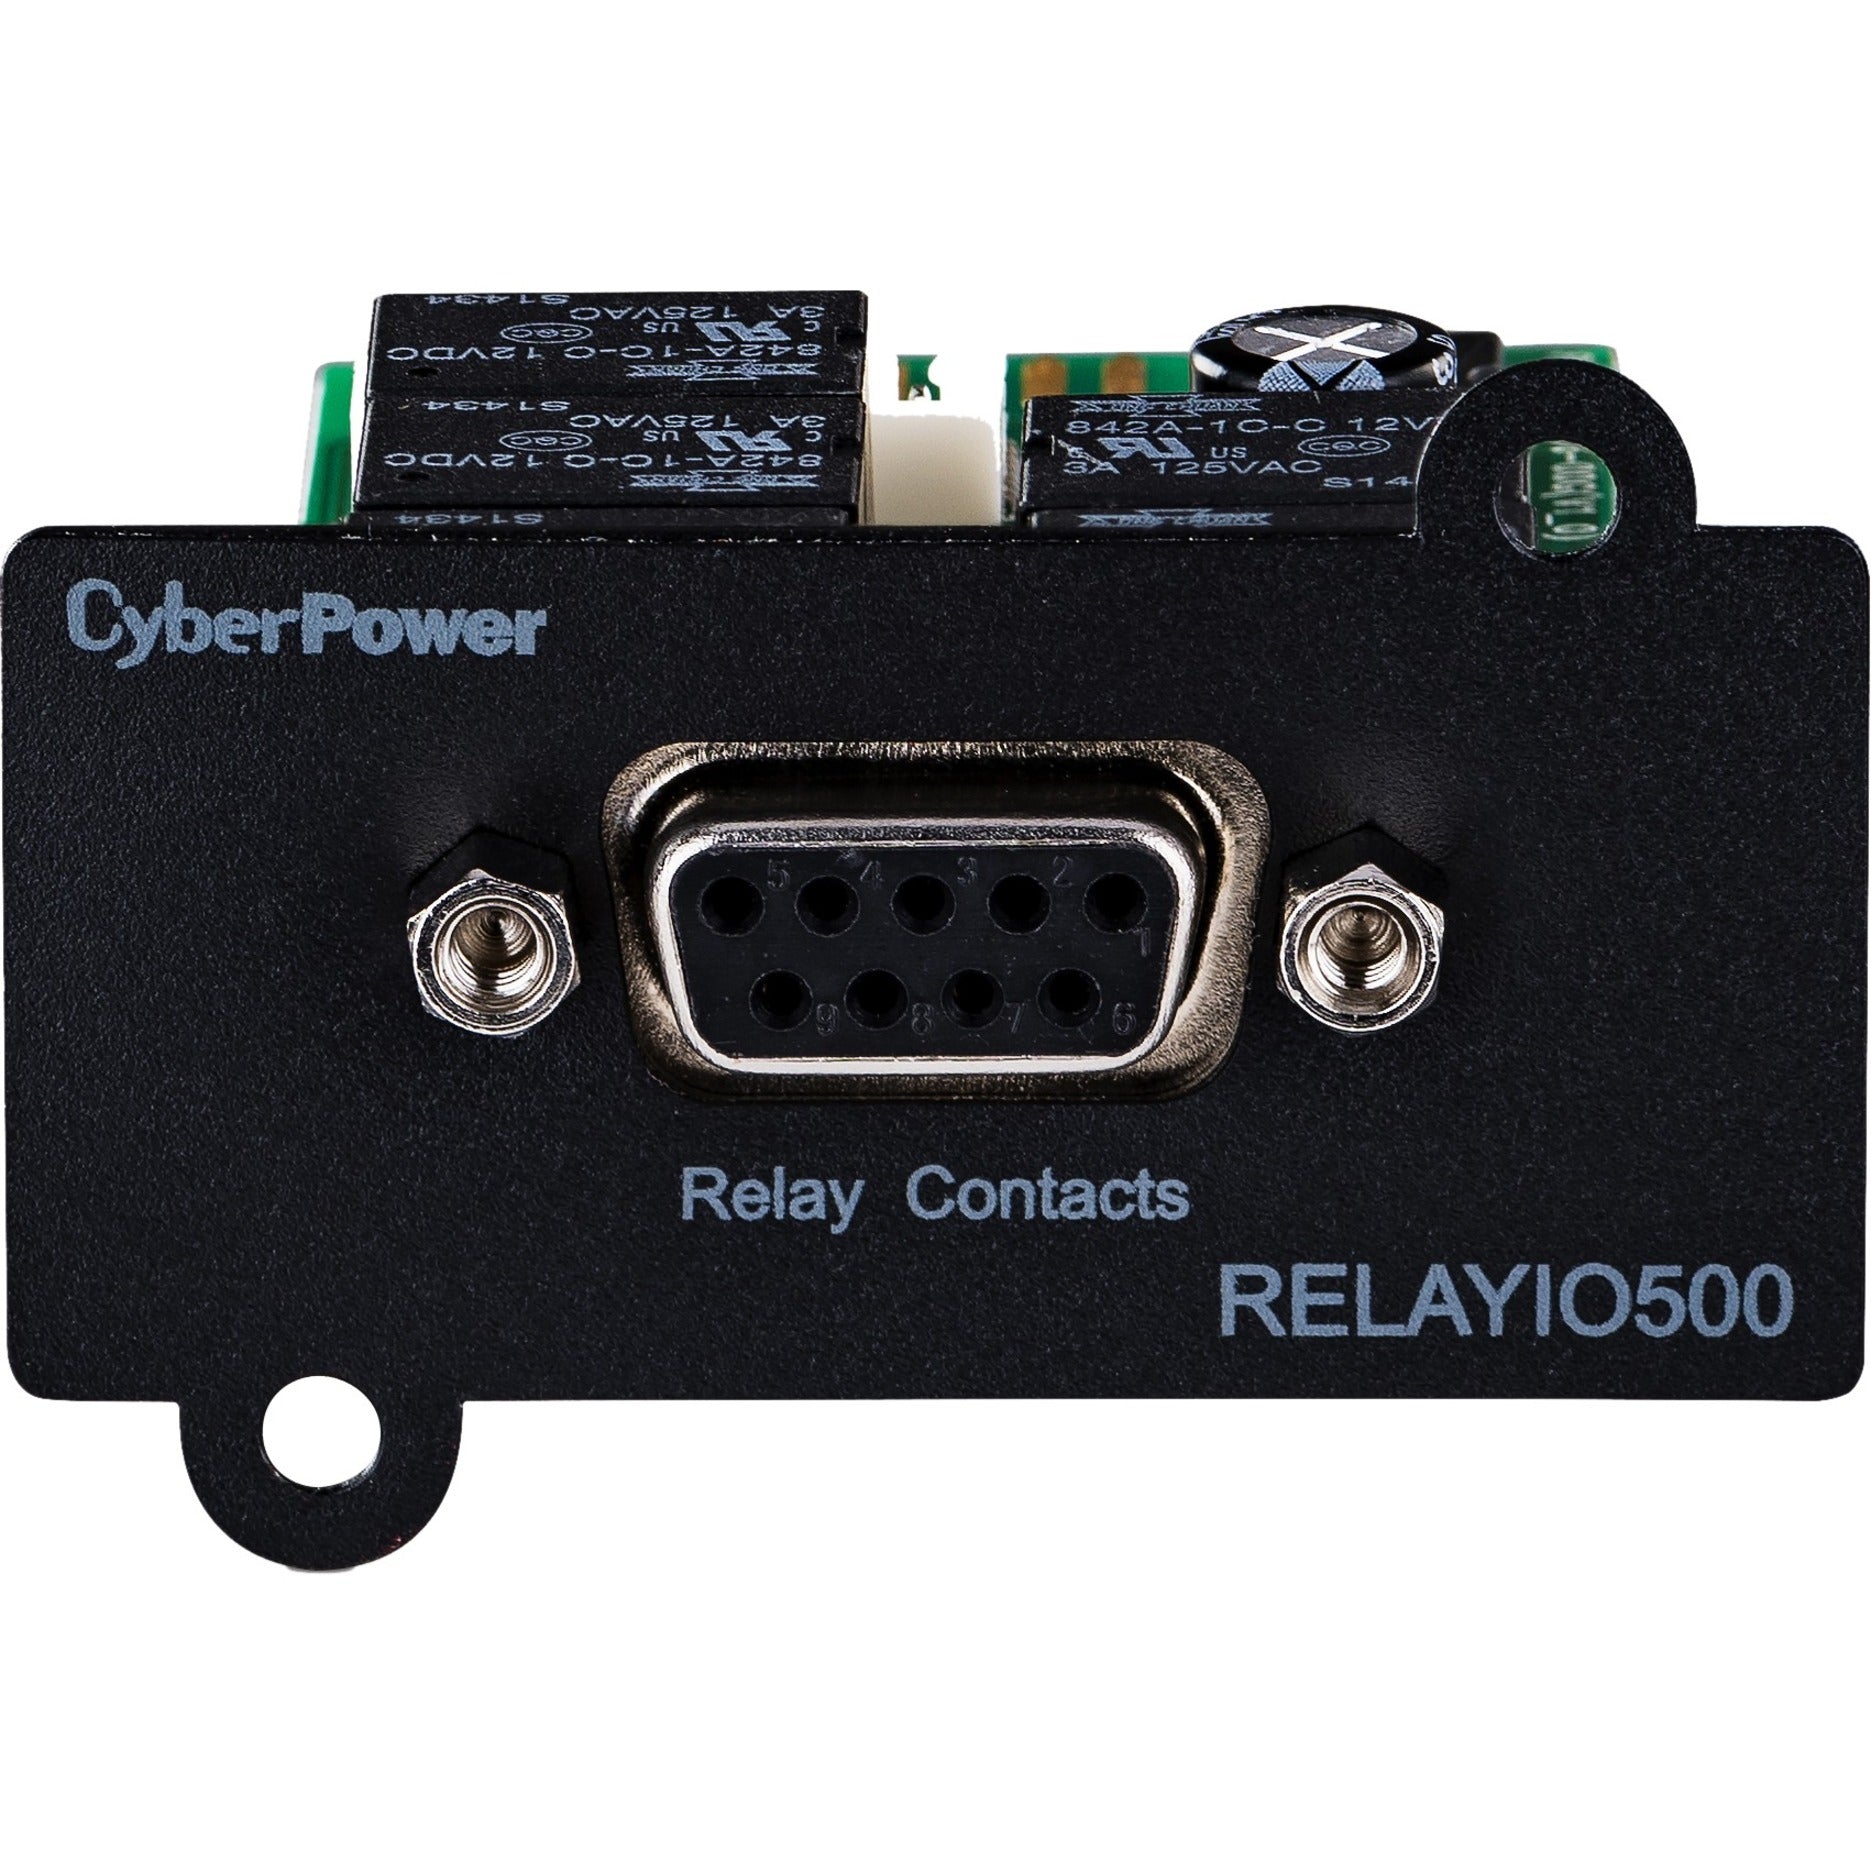 CyberPower RELAYIO500 Remote Power Management Adapter 3 Year Warranty Serial Interface